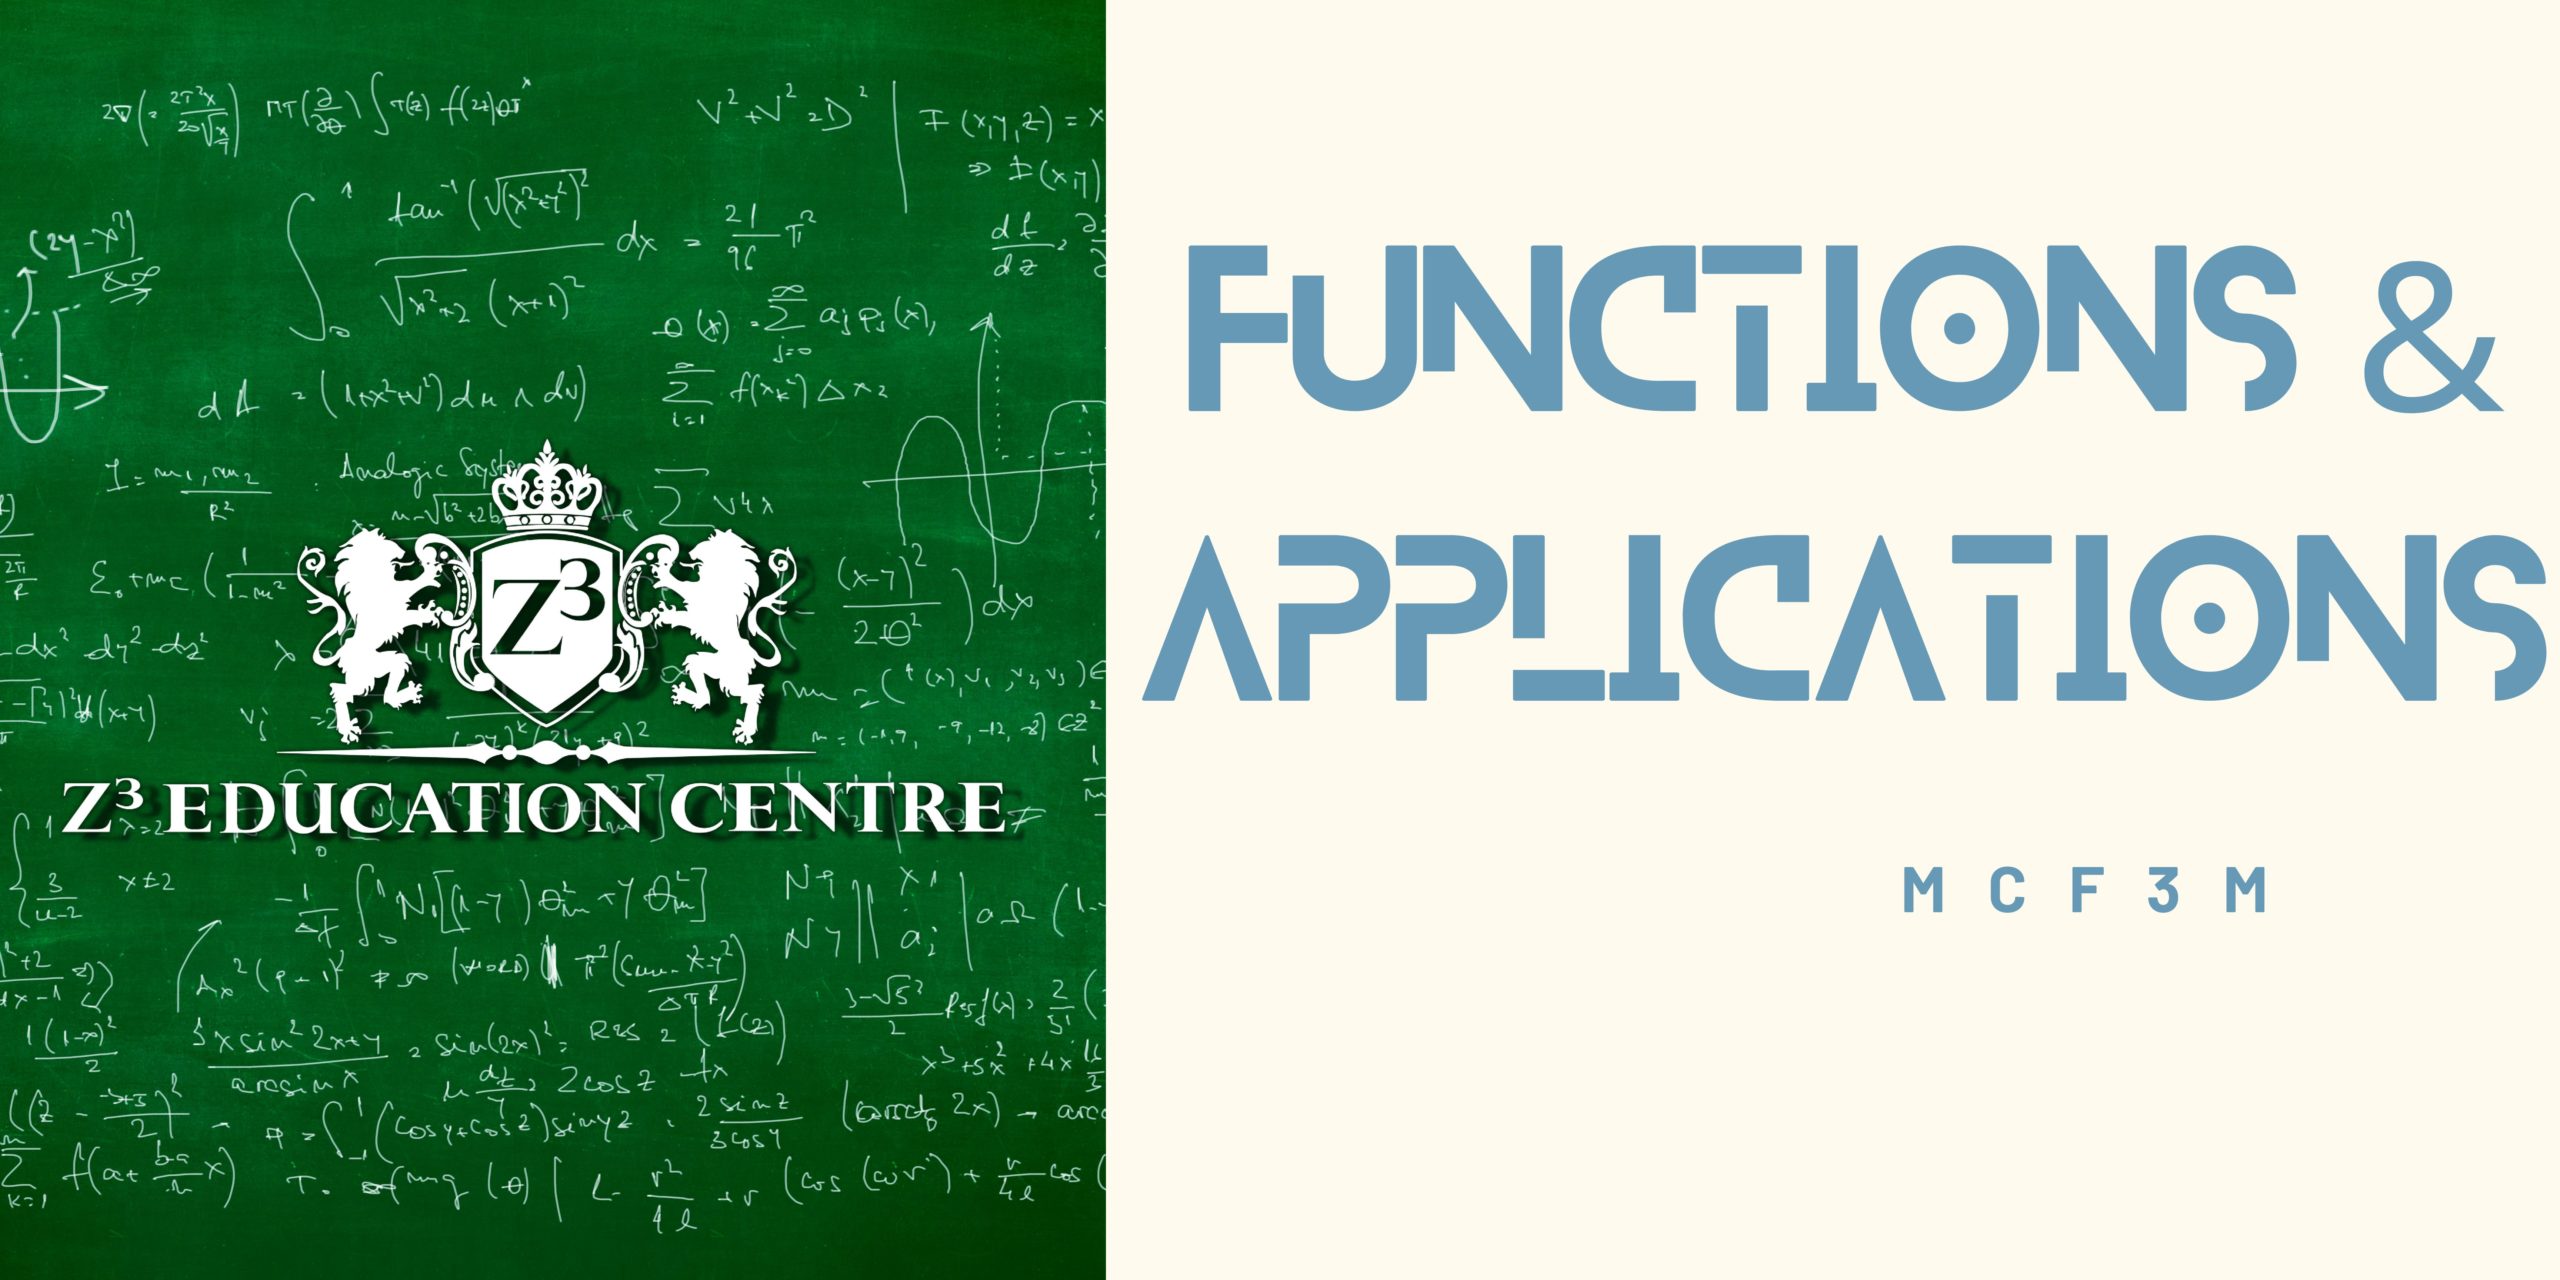 Functions and Applications